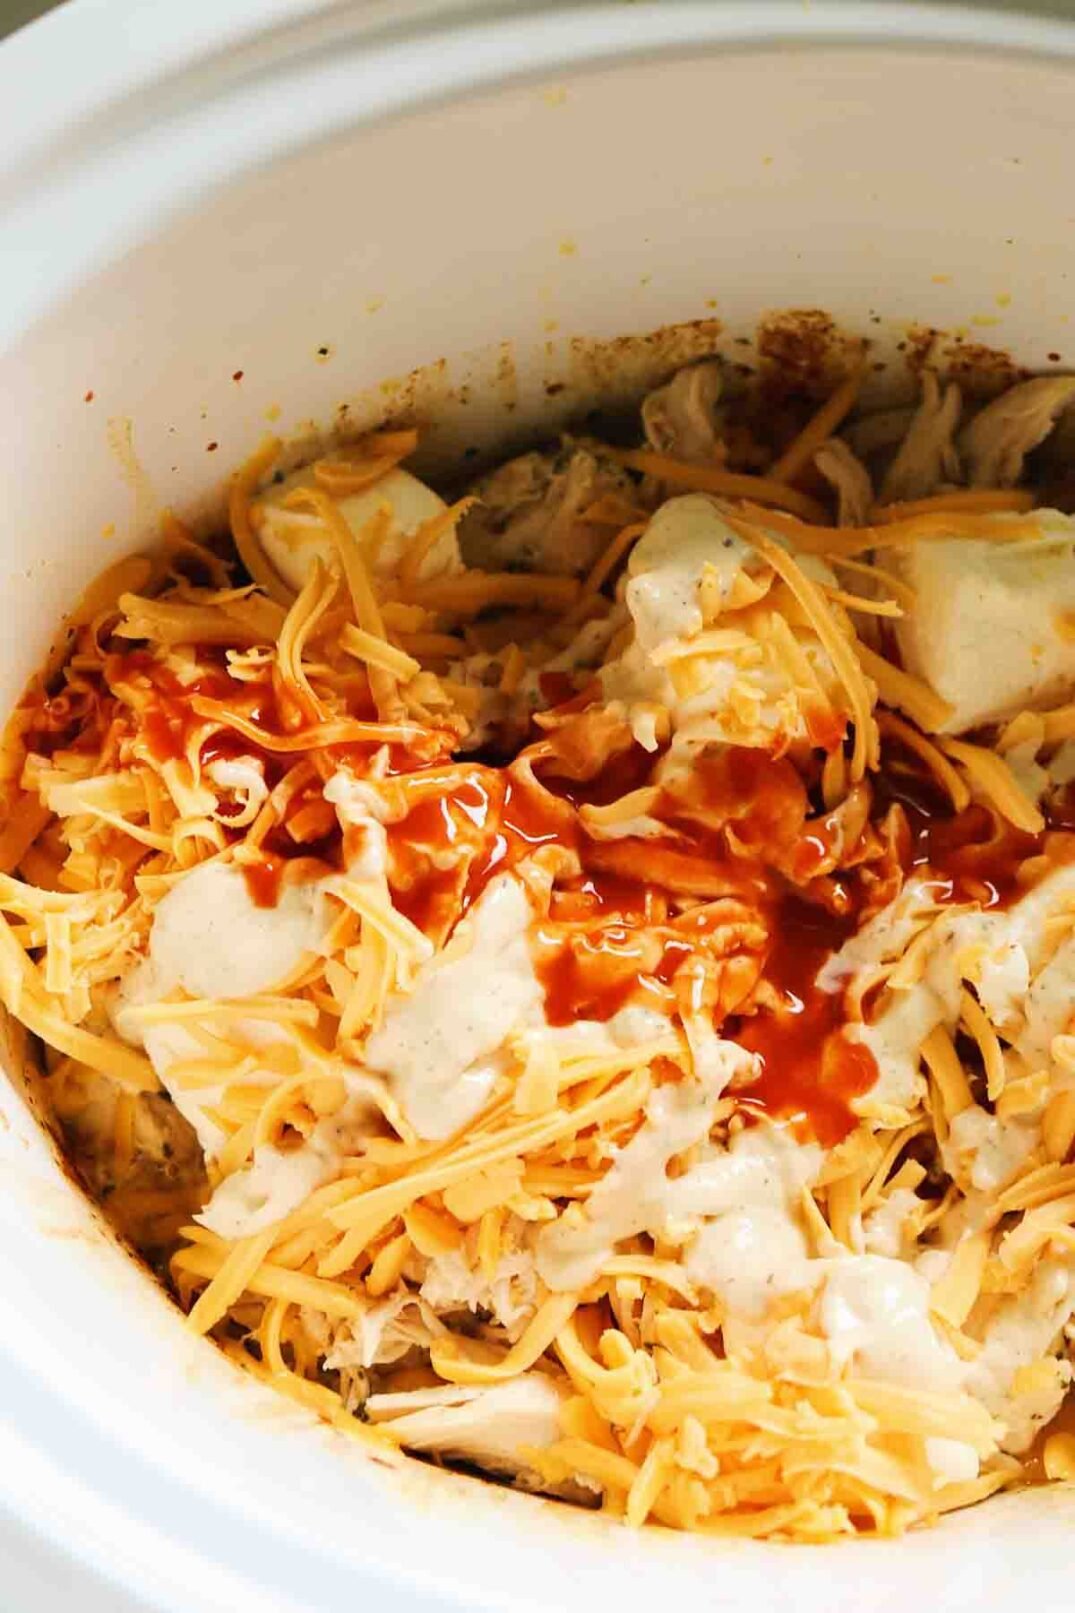 shredded cheeses in a crockpot to make buffalo chicken dip.